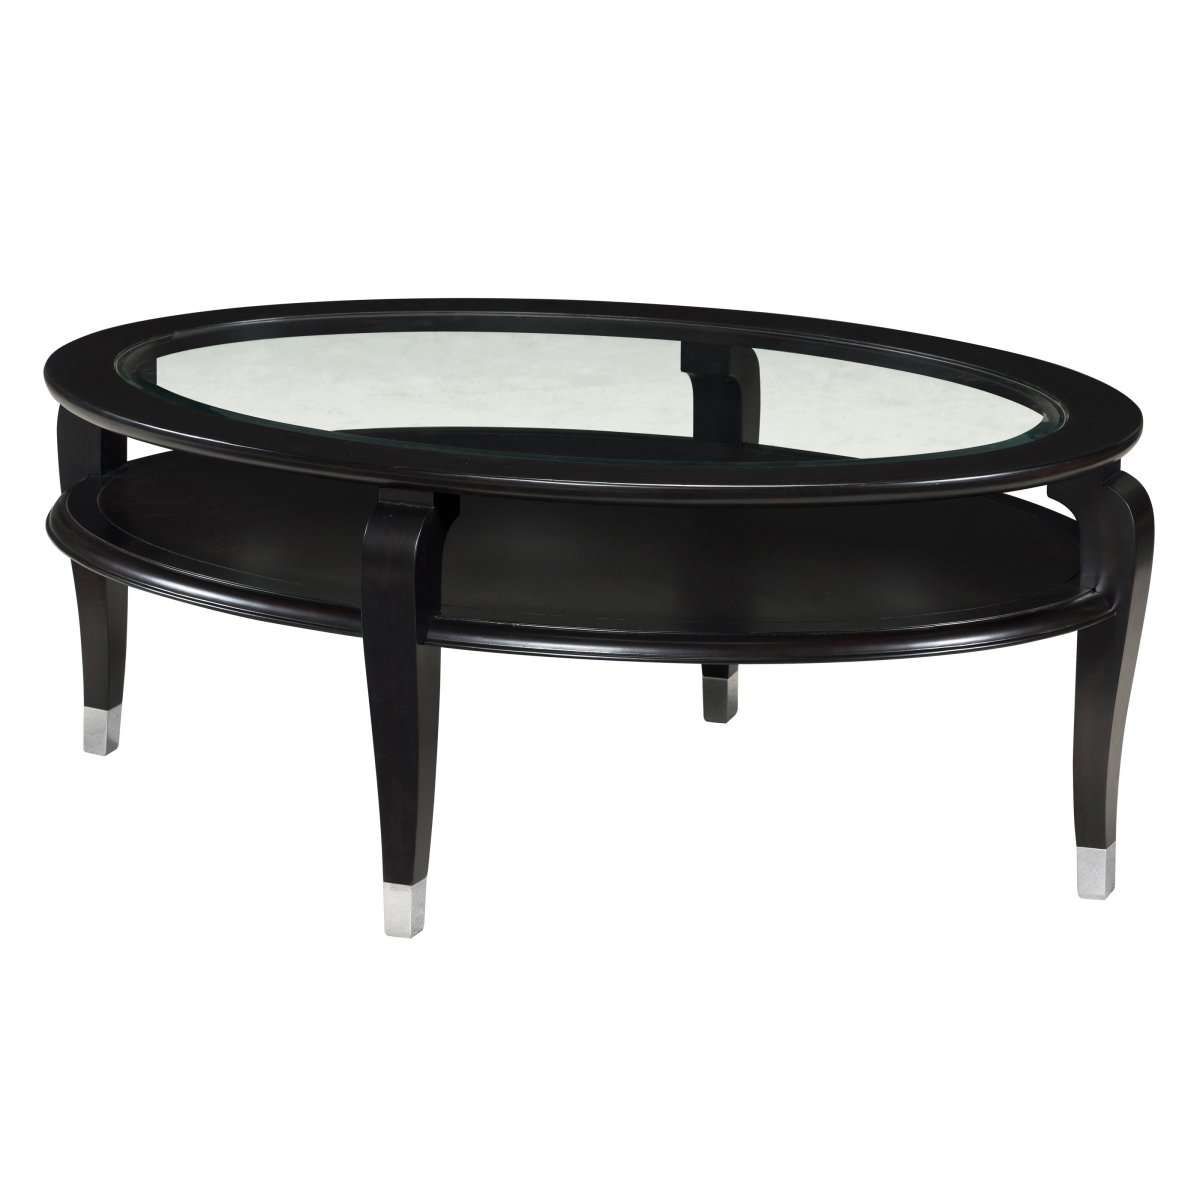 Popular Oval Glass Coffee Tables With Regard To Six Things To Consider When Choosing An Oval Glass Coffee Table (View 16 of 20)